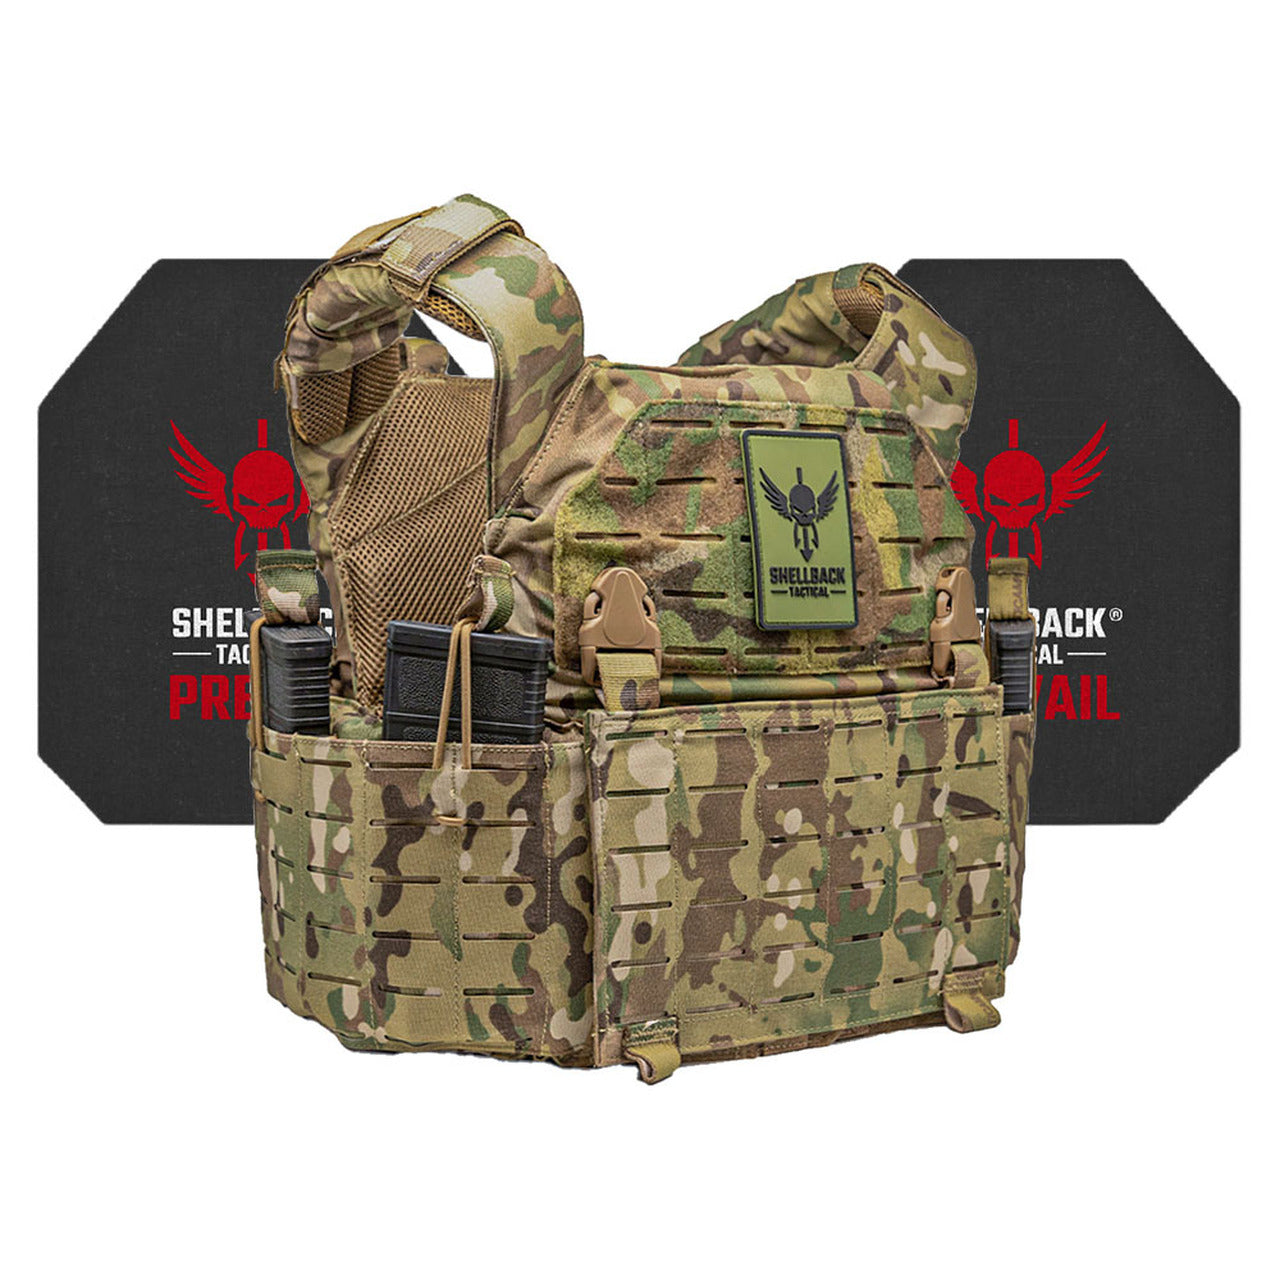 A Shellback Tactical Rampage 2.0 Active Shooter Kit with Level IV 4S17 Plates plate carrier with a multicam camouflage pattern.